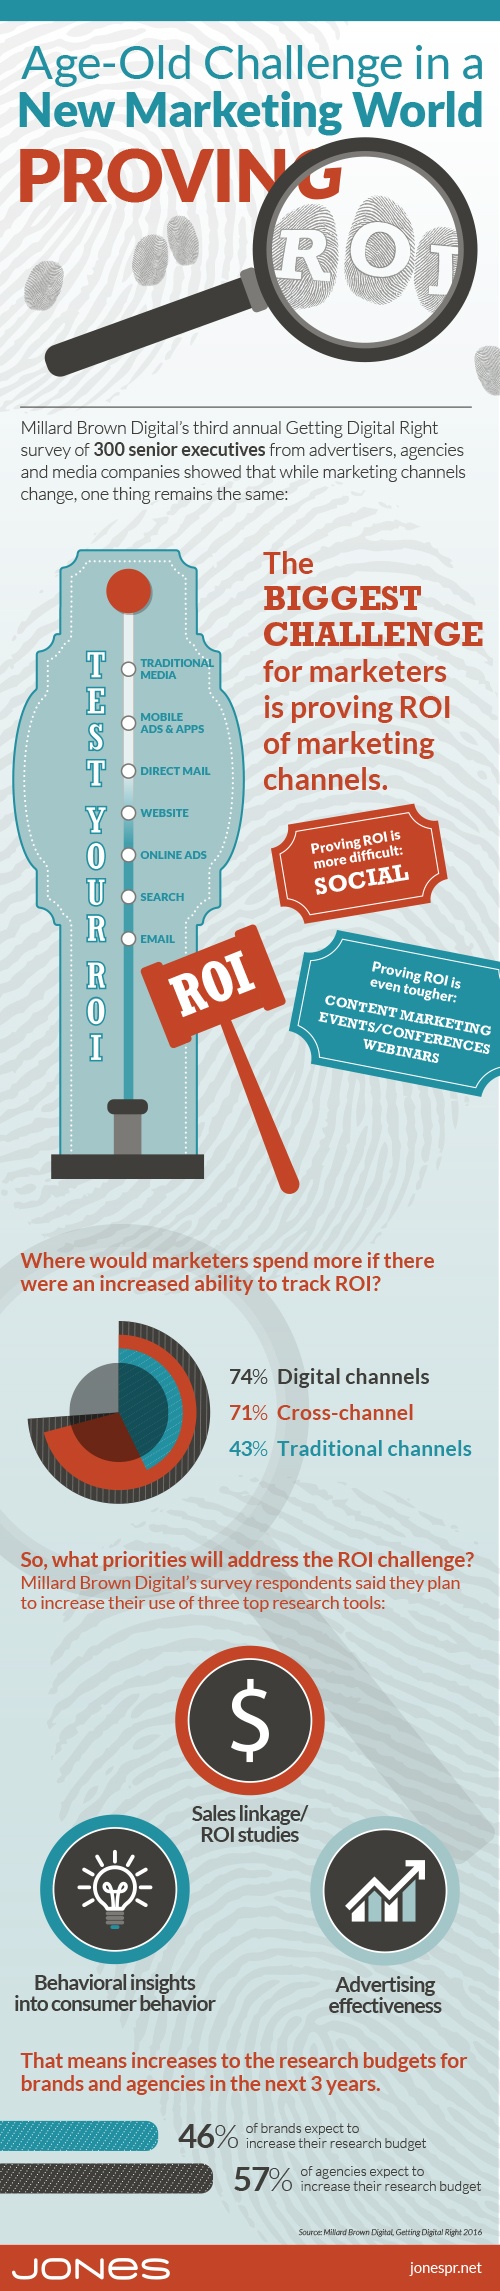 Providing ROI Continues to Vex Marketers (Infographic)